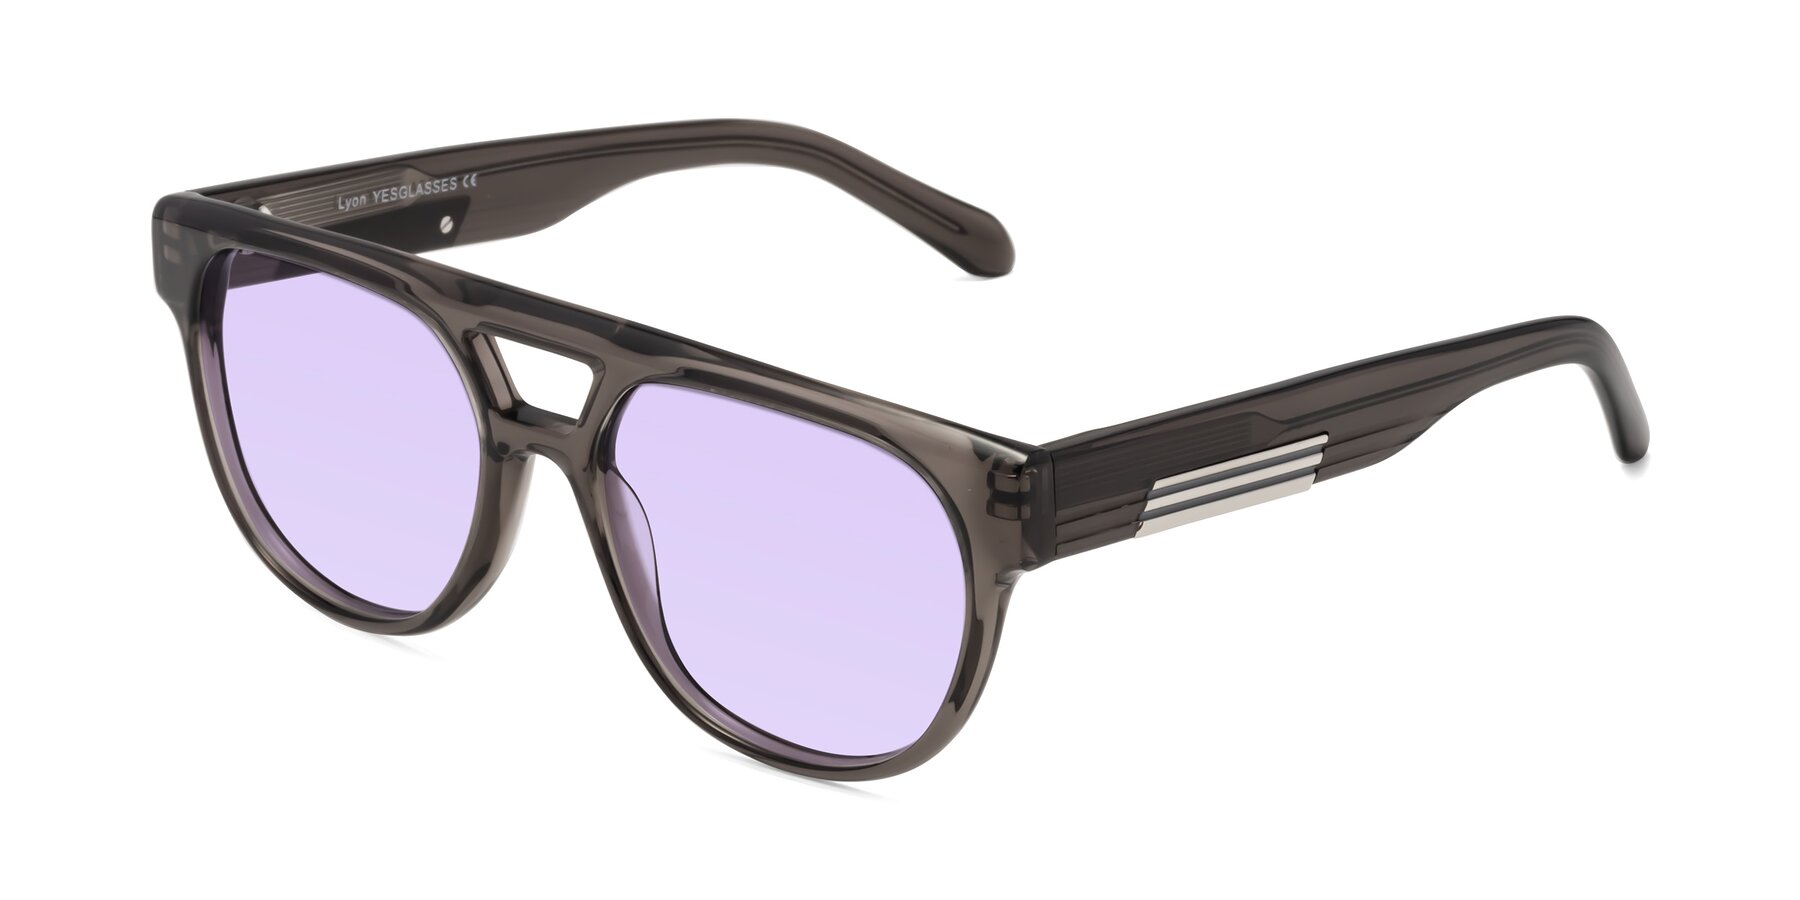 Angle of Lyon in Charcoal Gray with Light Purple Tinted Lenses